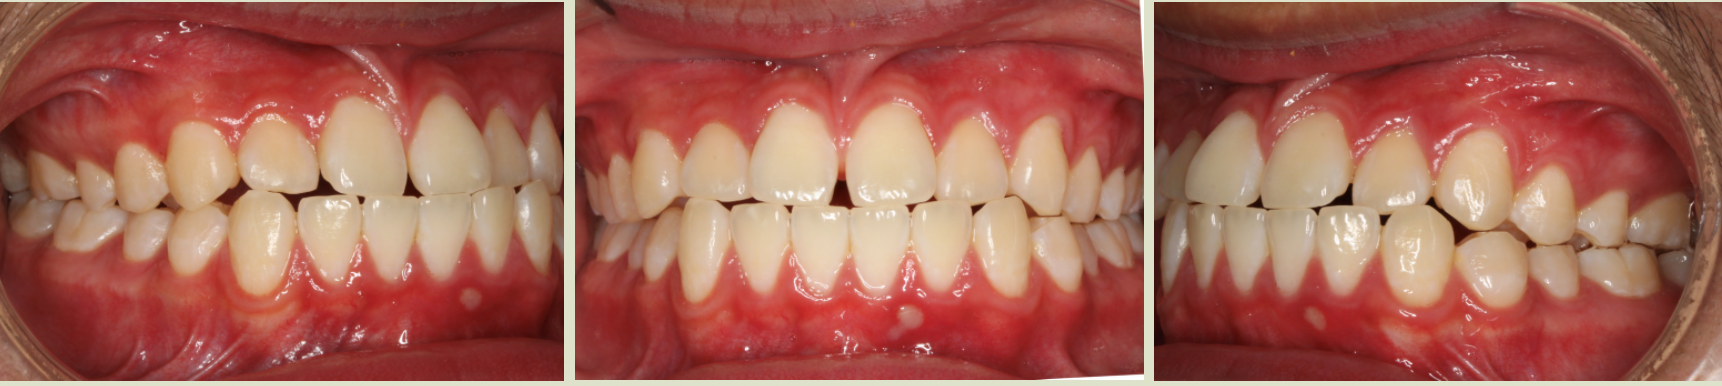 Before photo (front view of teeth): Underbite, Case Study #4